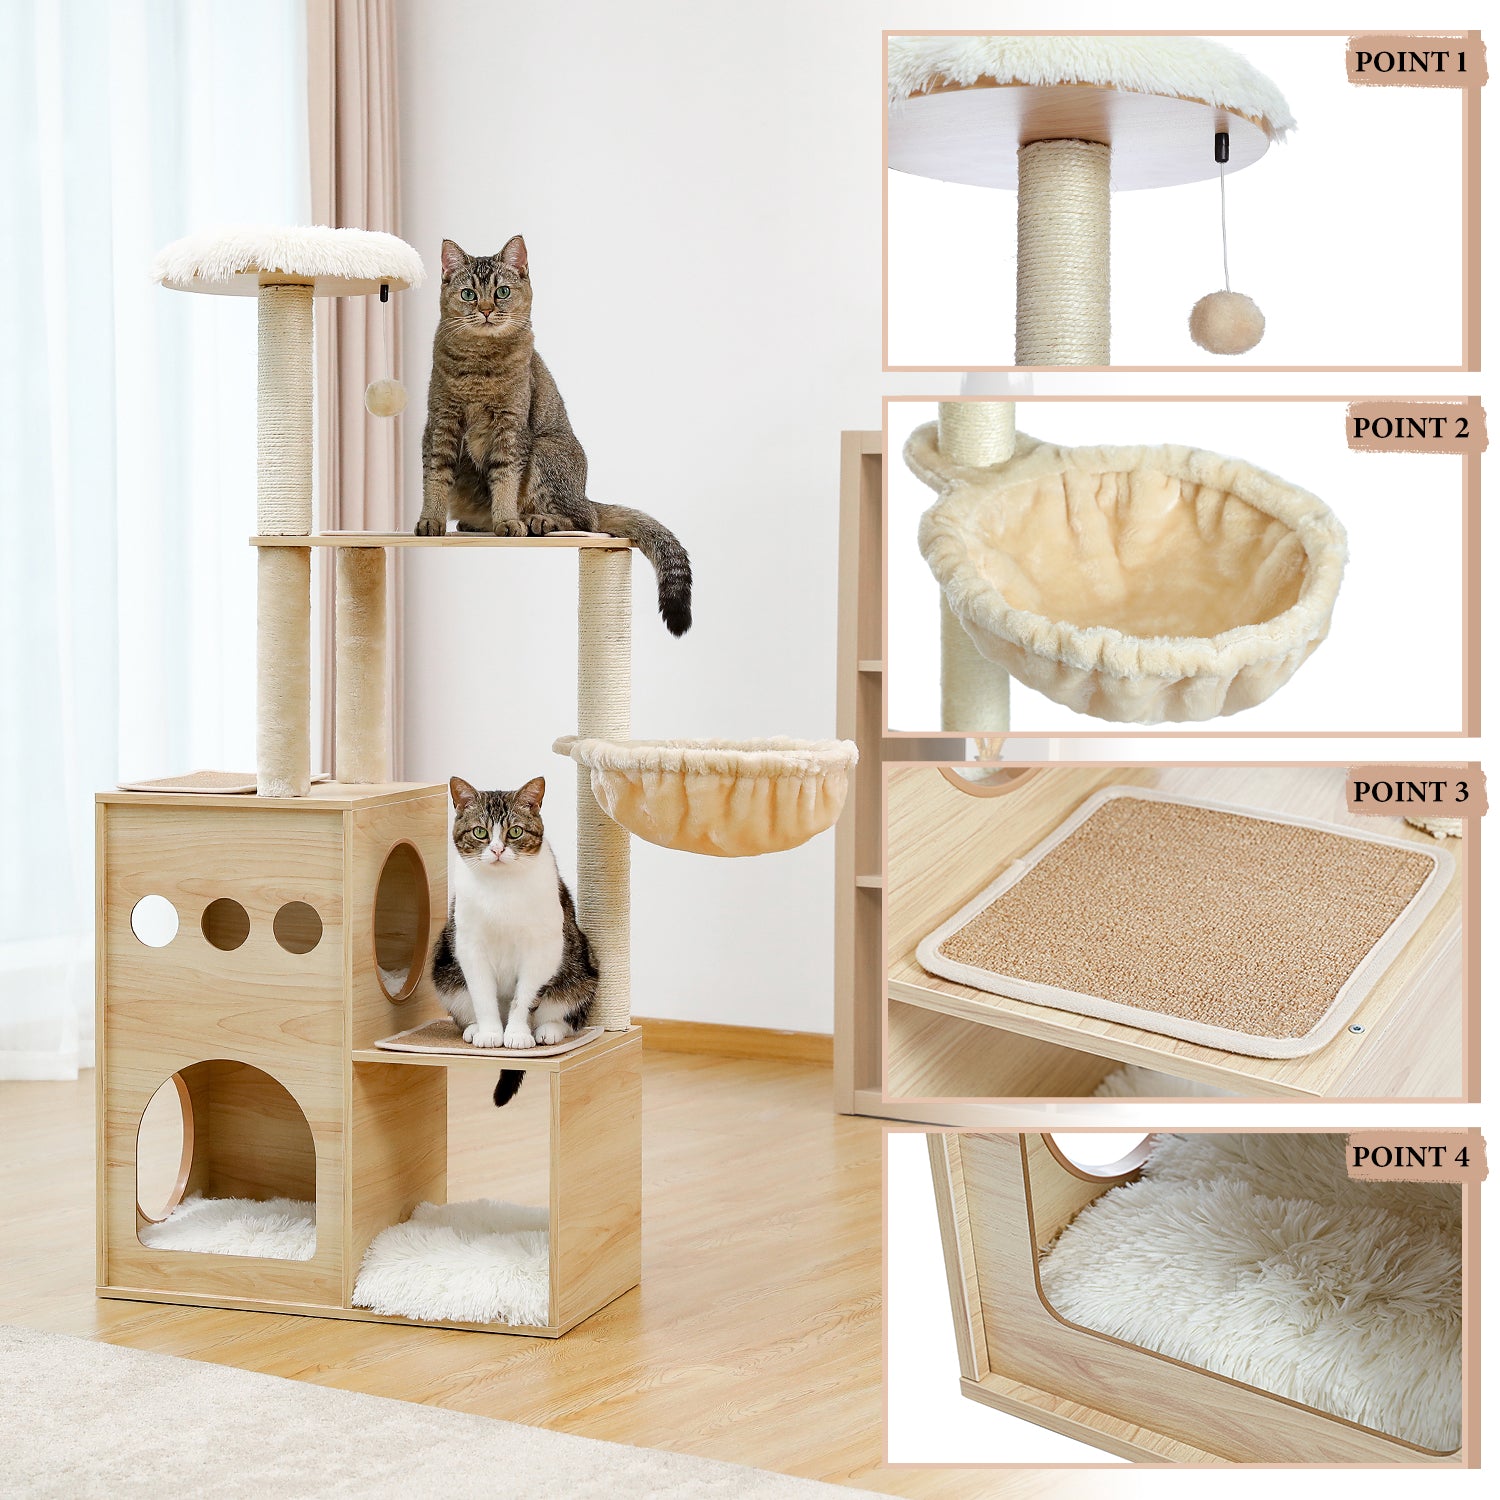 Modern Luxury Cat Tree Wooden Multi-Level Cat Tower Cat Sky Castle With 2 Cozy Condos, Cozy Perch, Spacious Hammock And Interactive Dangling Ball - TOYSHIP